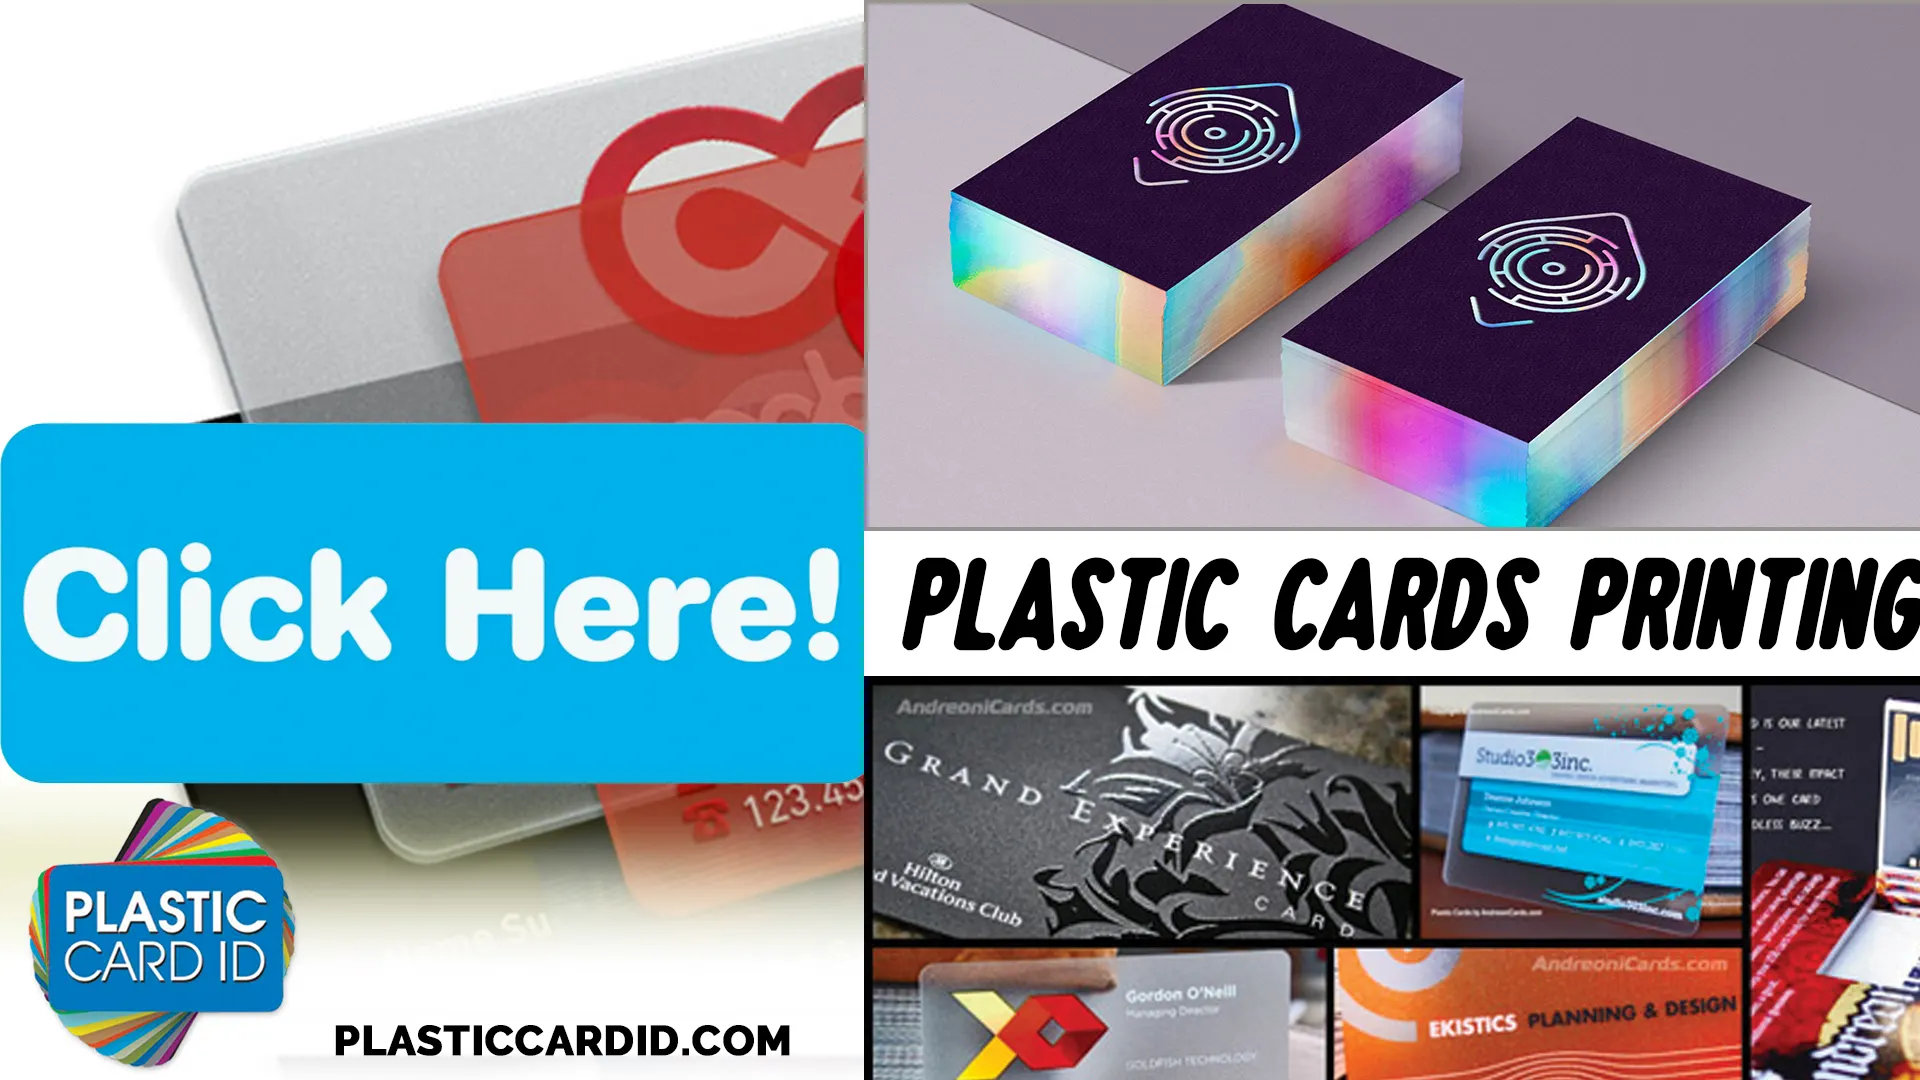 The Journey from Plastic Card to Recycled Product